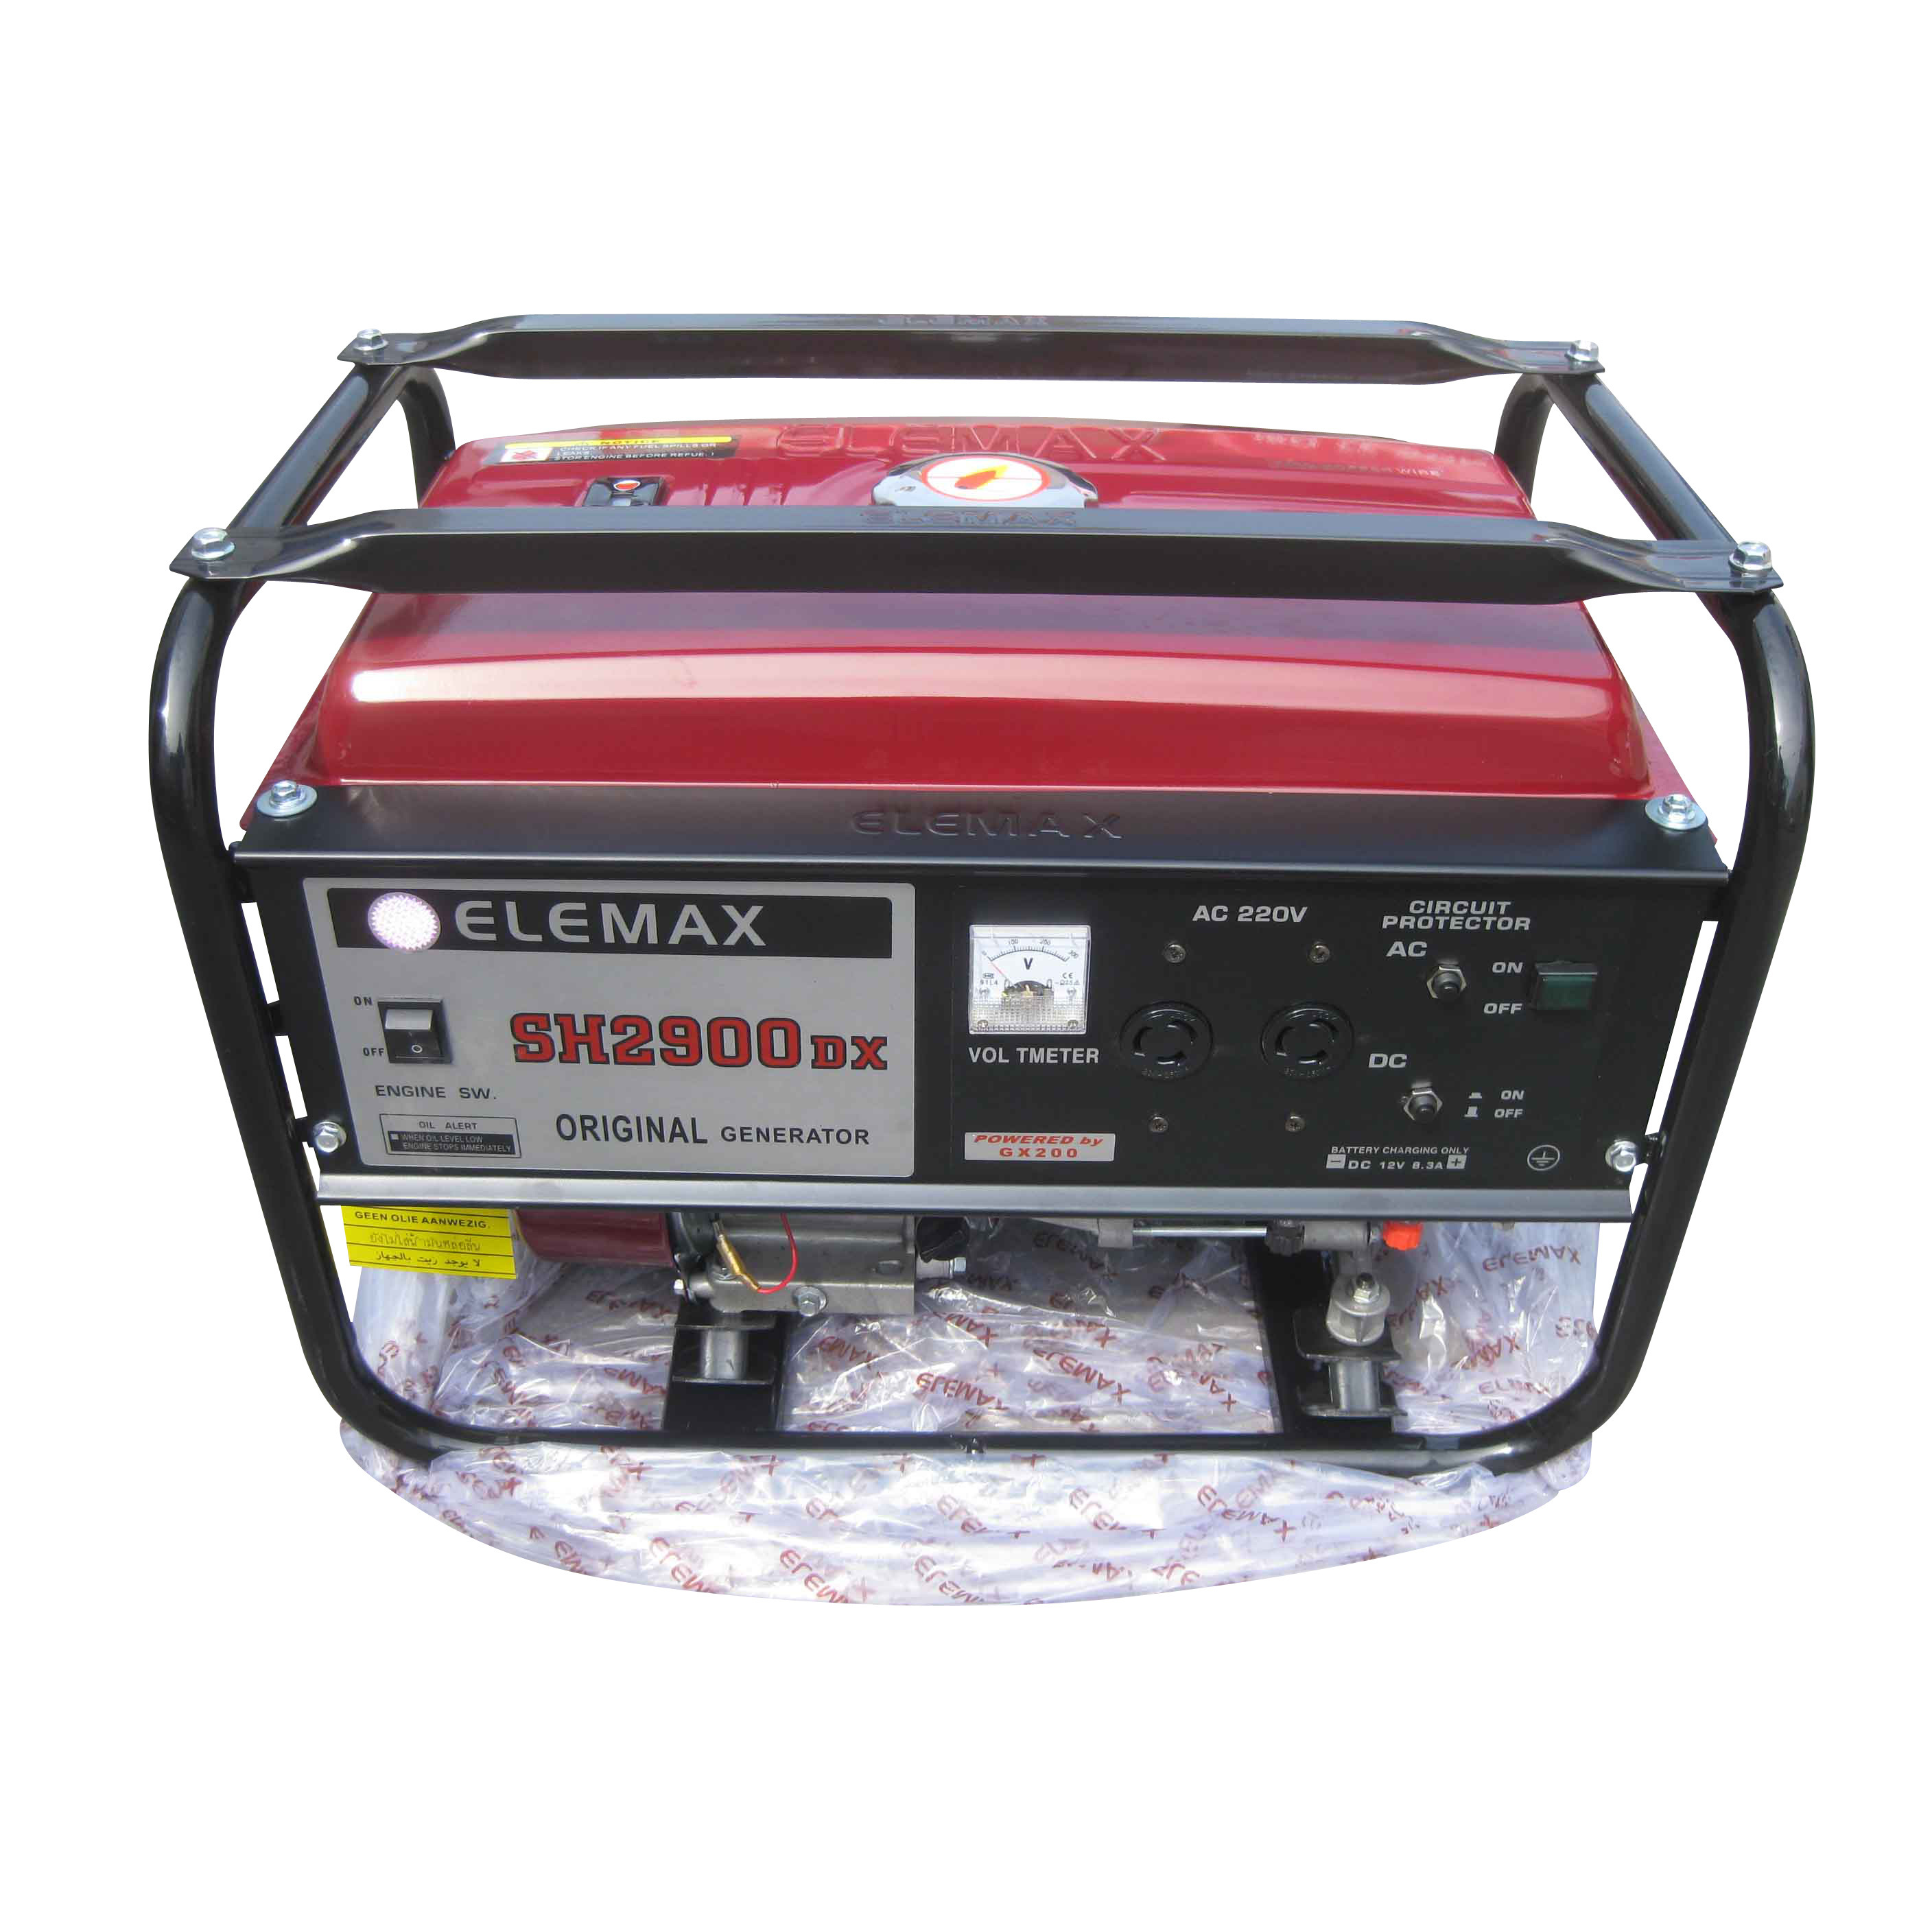 Elemax Gasoline Generator Sh2900dxe with CE and Soncap